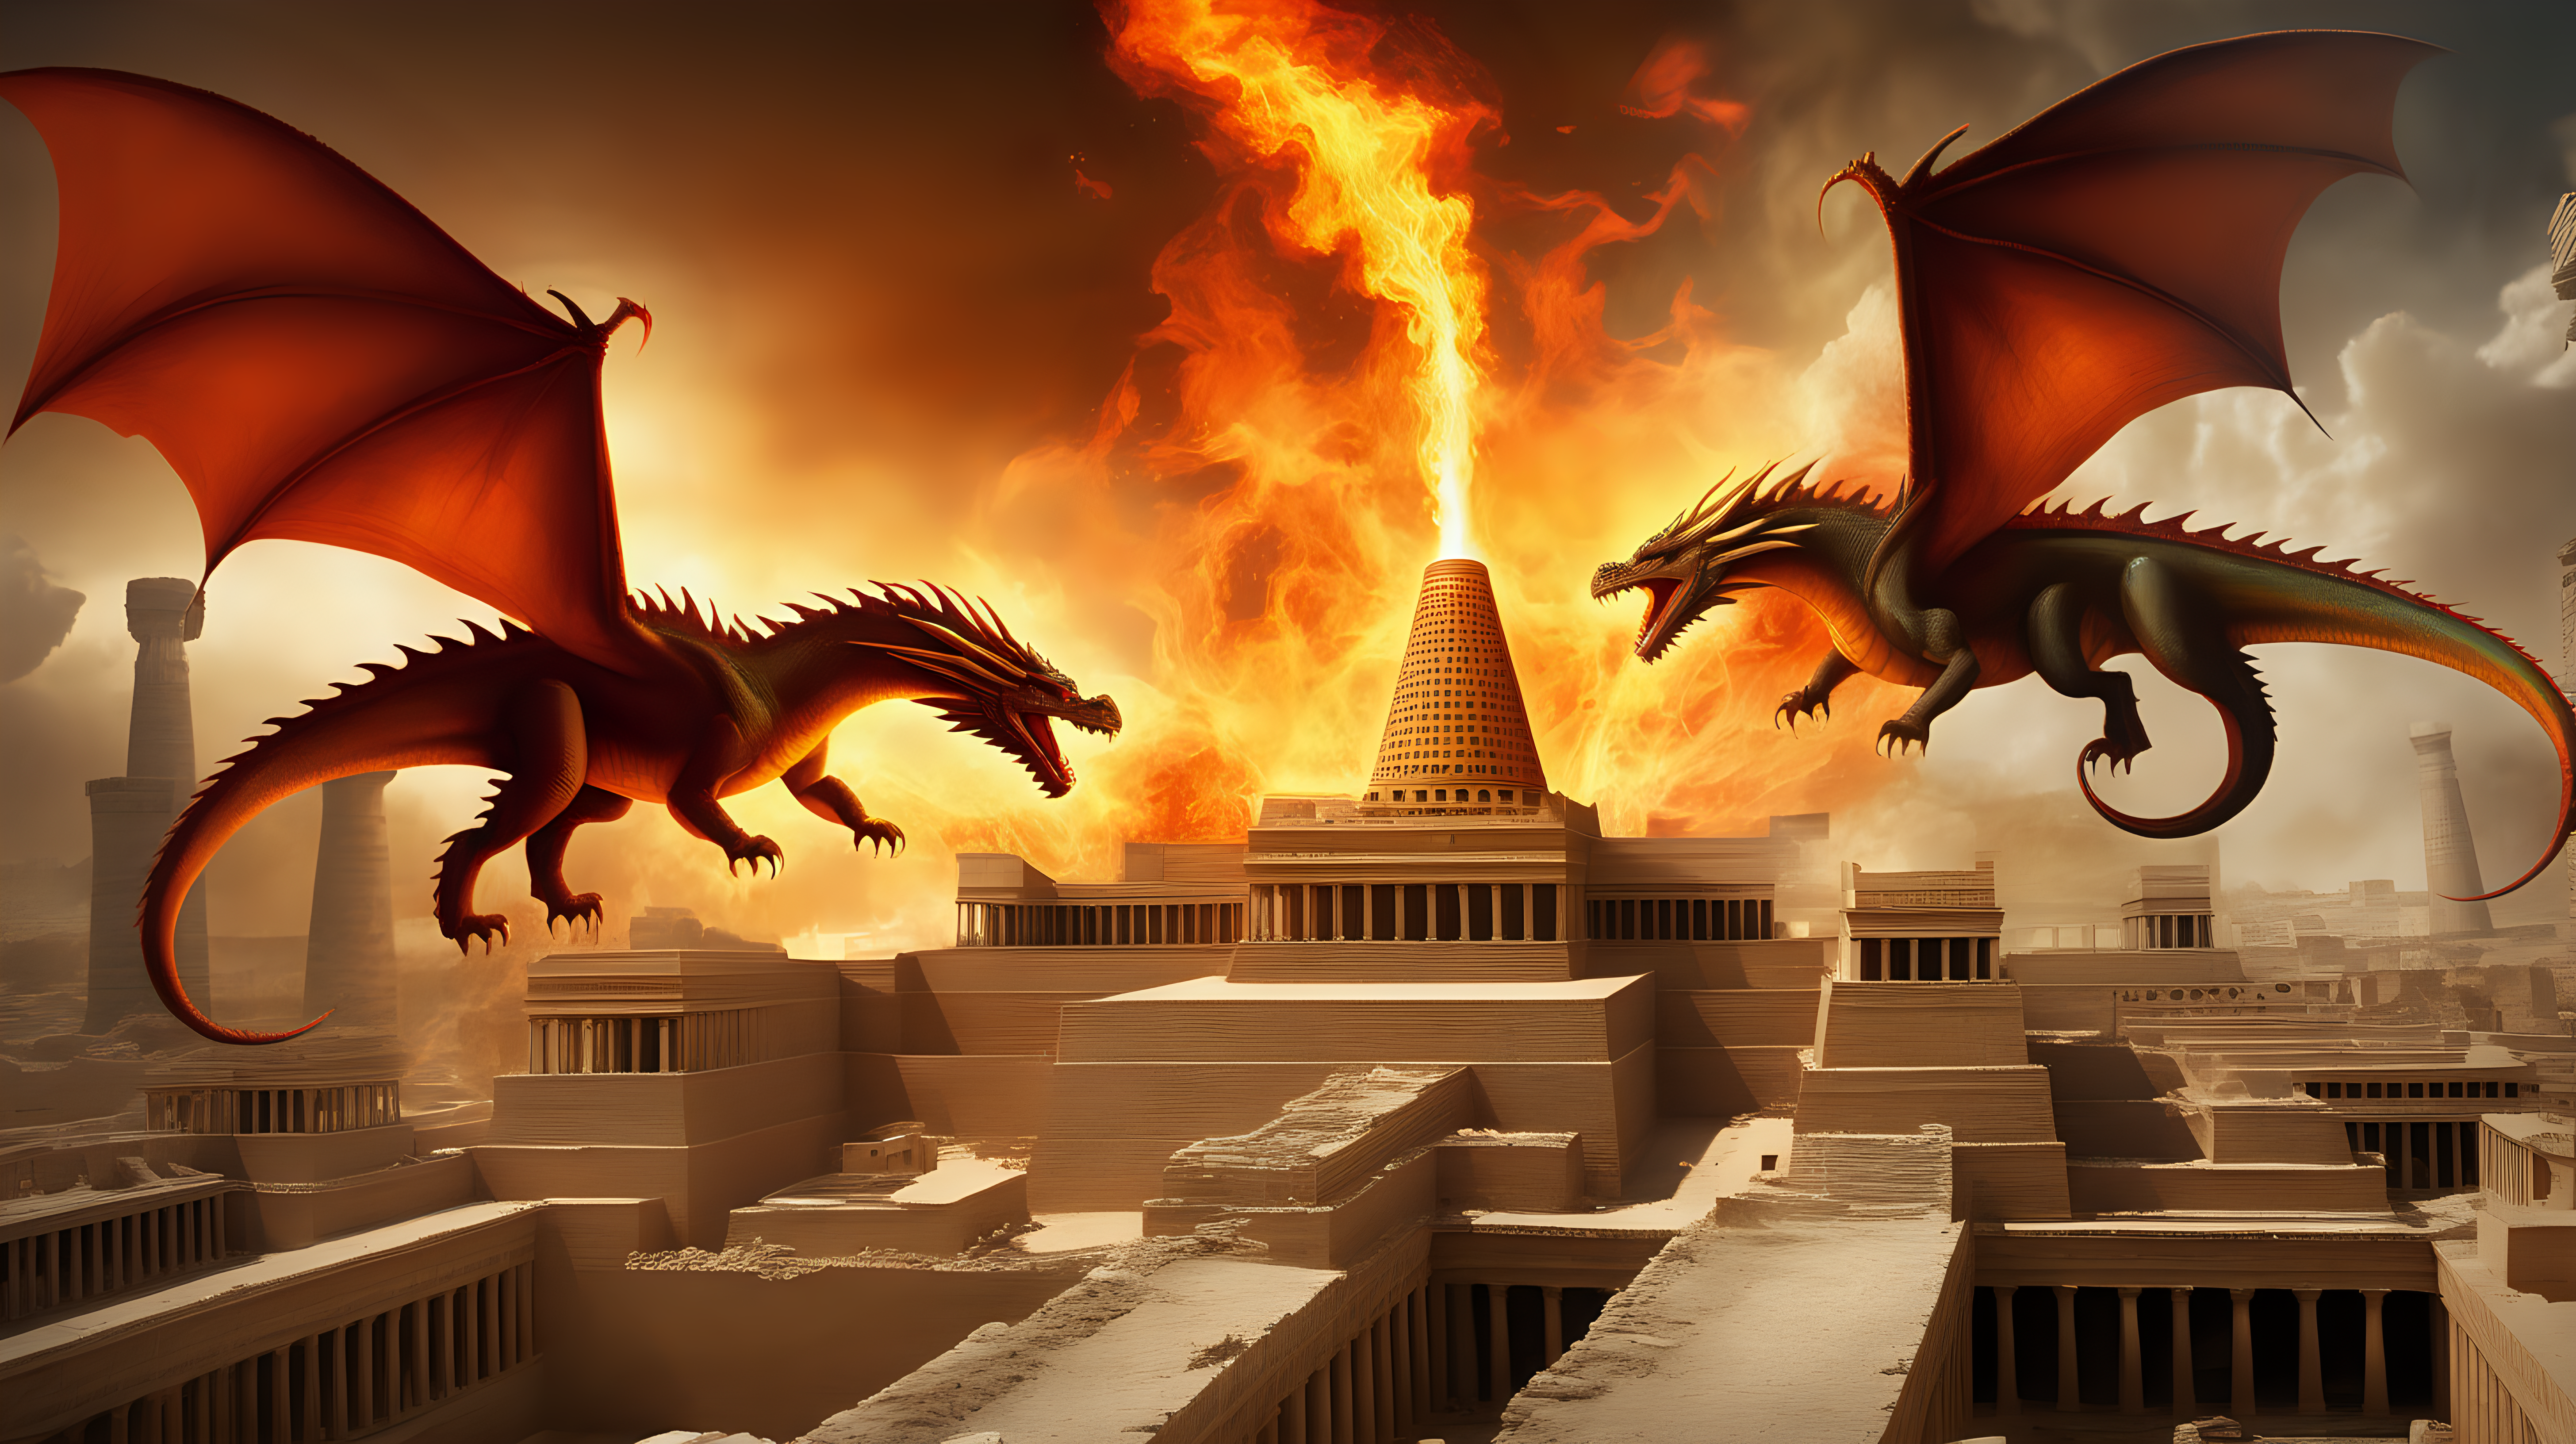 Fire breathing dragons hovering over ancient Babylon in